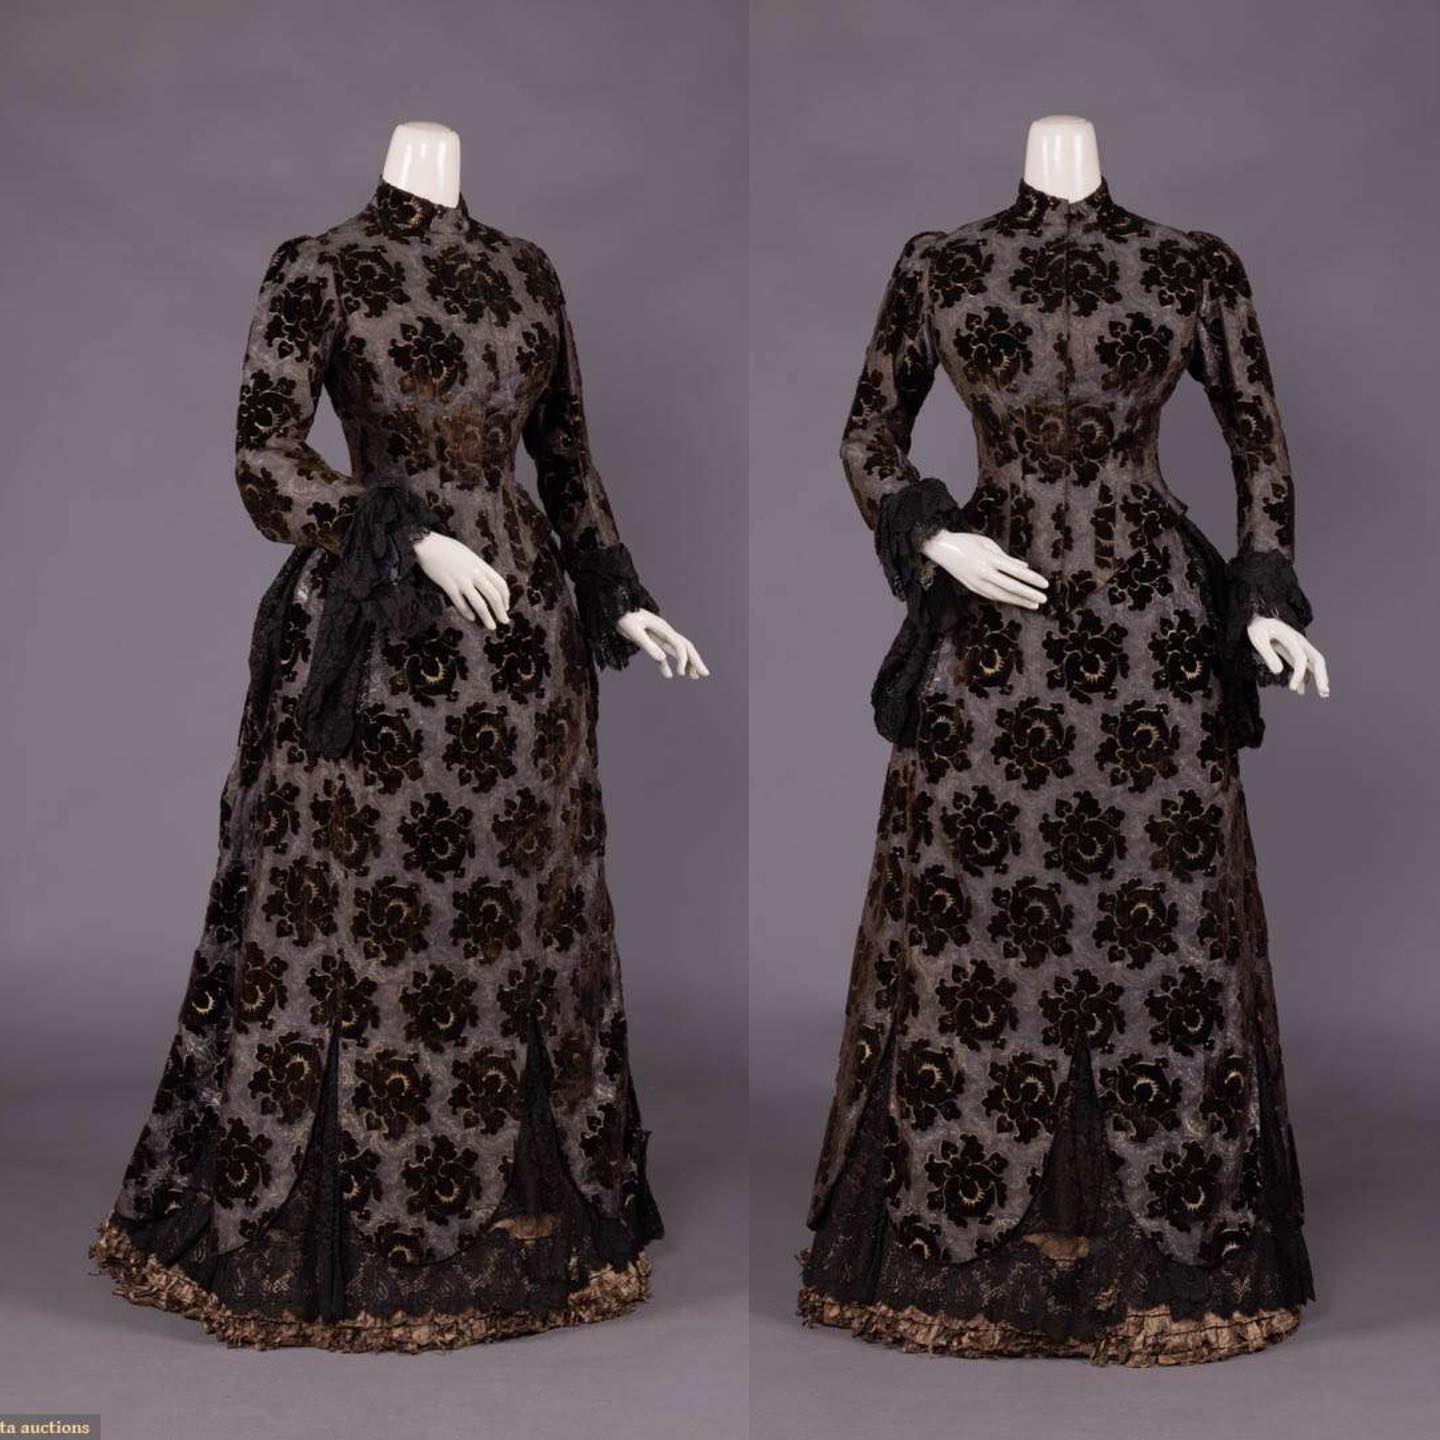 Day dress of cut velvet and patterned silk, c. 1885 Sold by Augusta Auctions, Spring Sartorial Surprise - Visions of Vintage, May, 2022 Sturbridge, MA